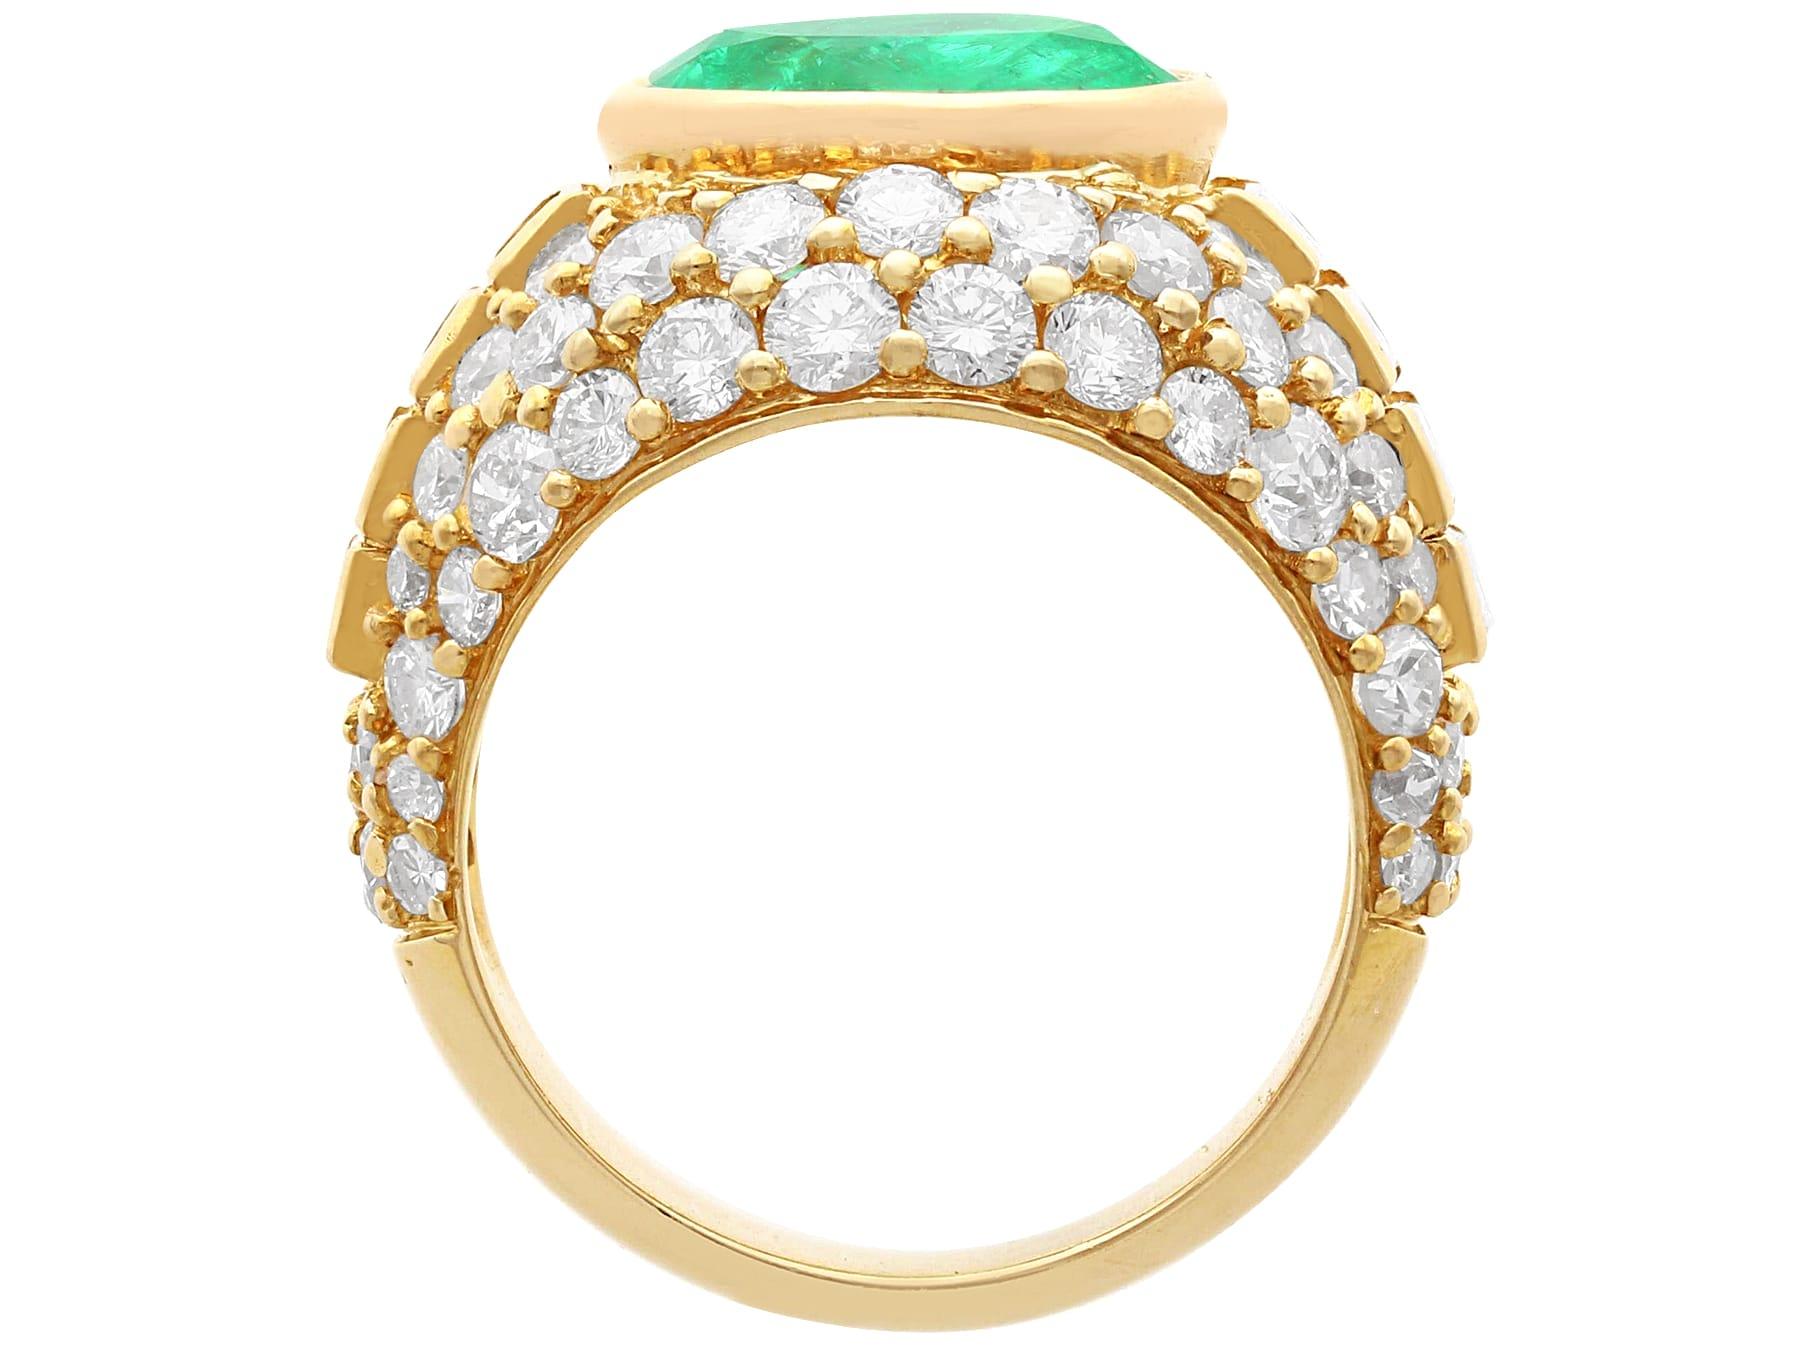 Vintage 5.12ct Colombian Emerald and 3.45ct Diamond, 18ct Yellow Gold Dress Ring For Sale 1